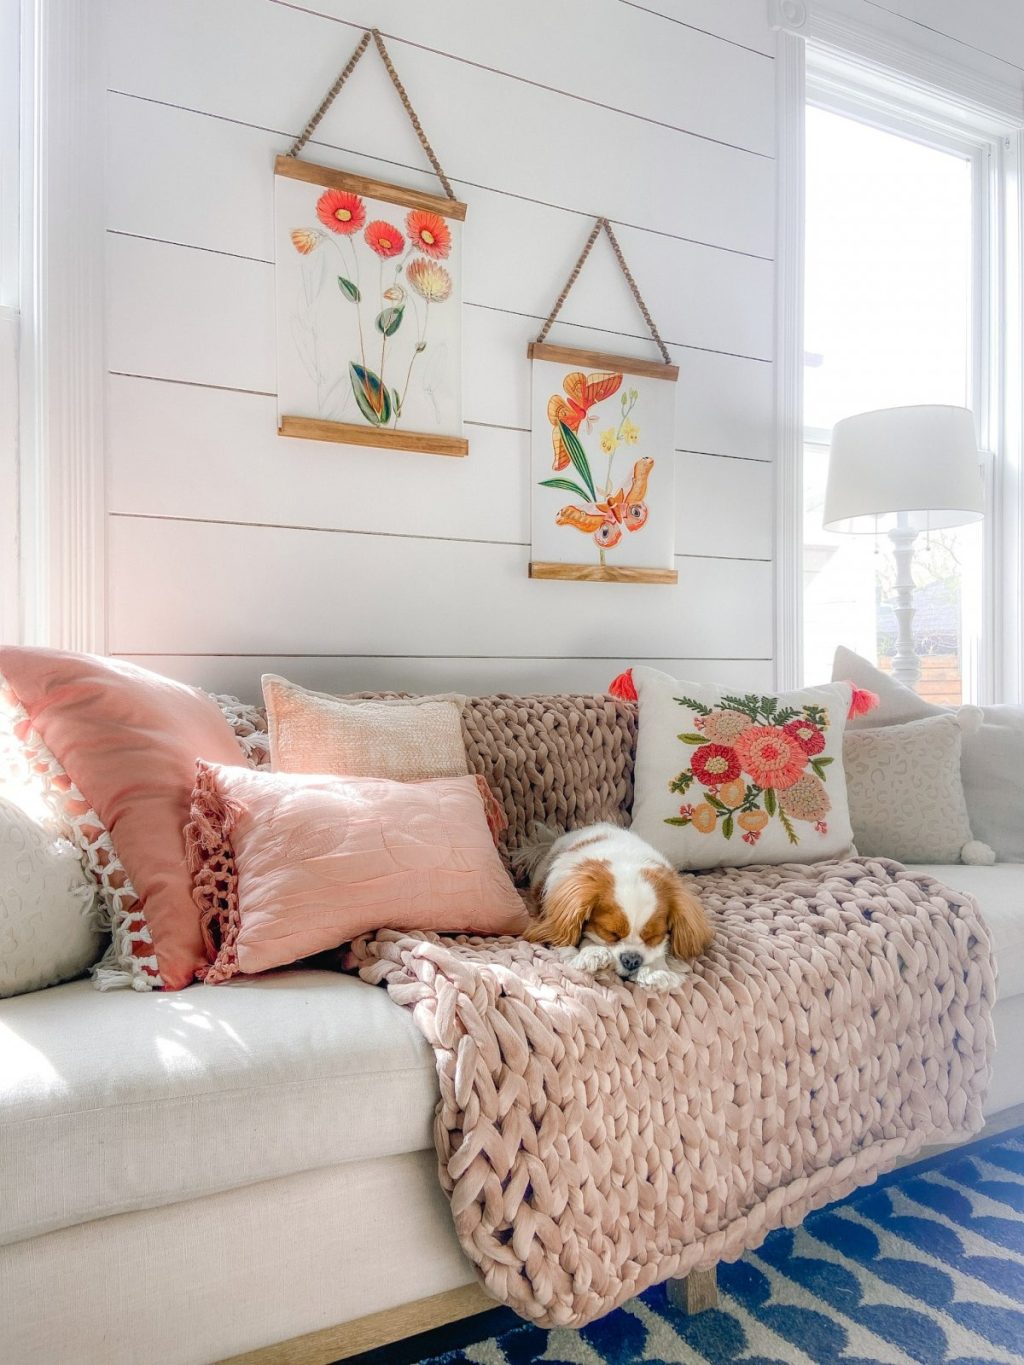 A cozy sofa and floral spring art above